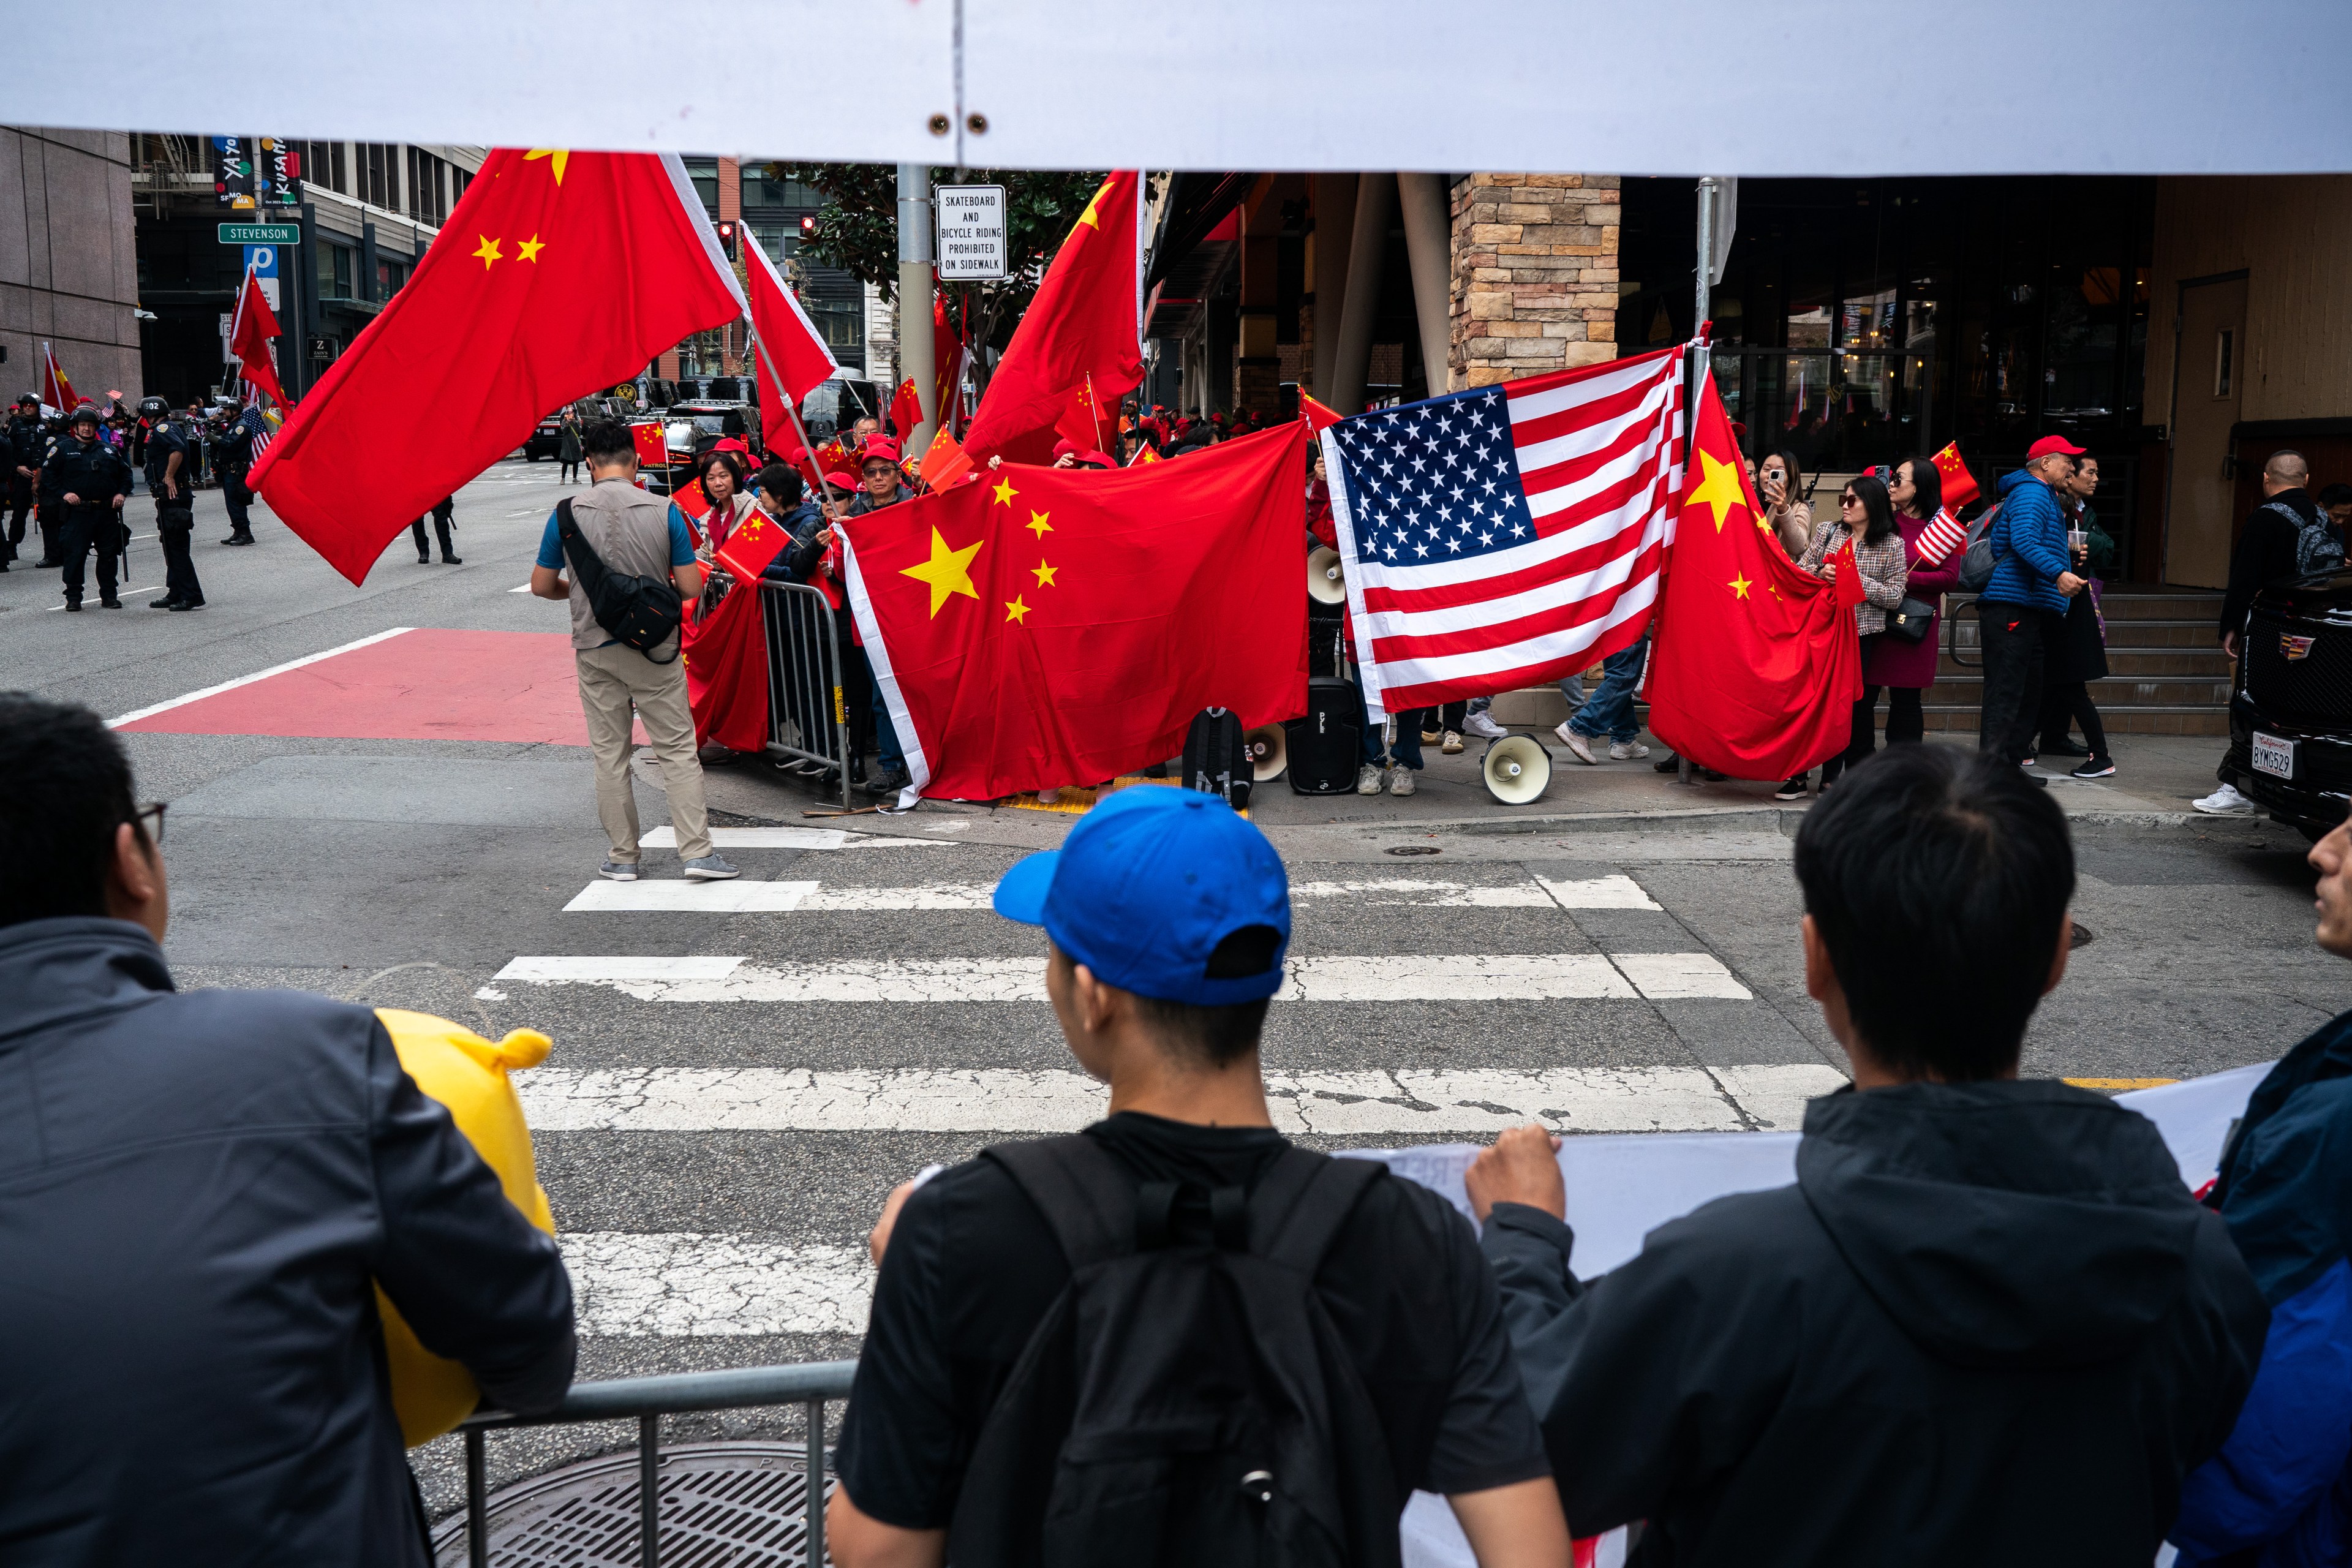 Large American and Chinese flags are seen during a protest in San Francisco.